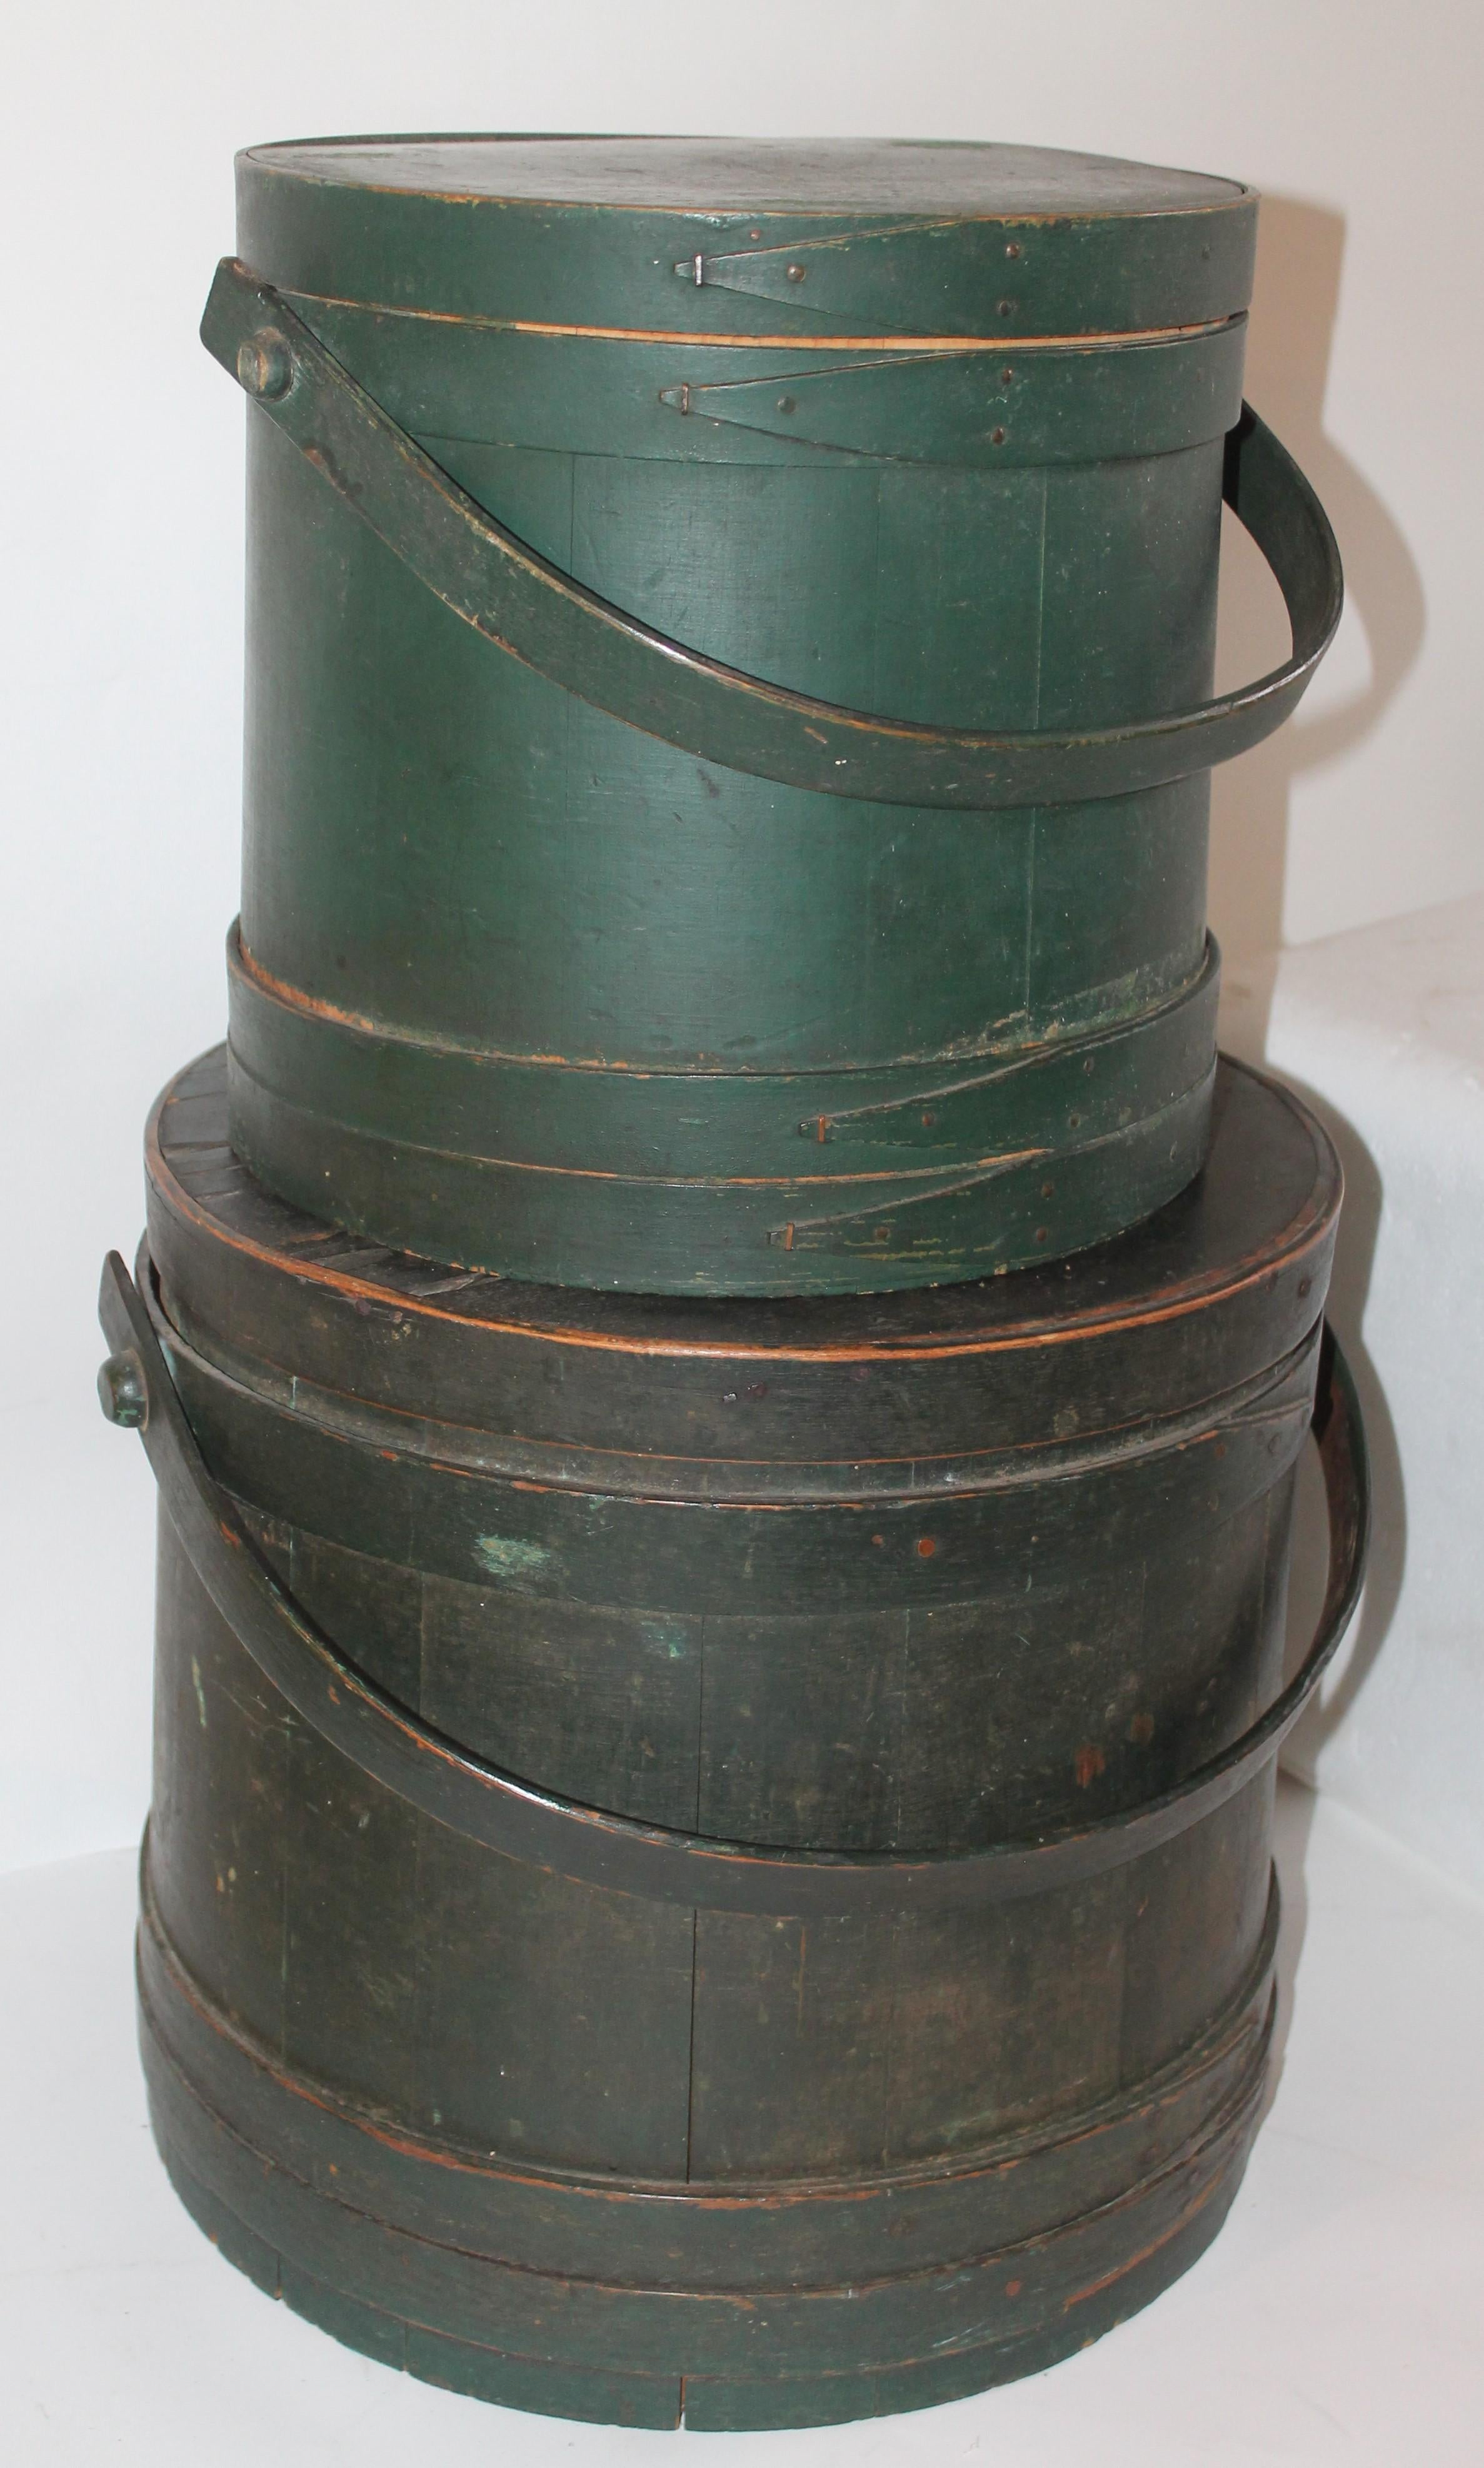 These two original painted green furkins are in good condition and are early cut nail construction. One is signed by the maker Murdock JN. Top smaller green bucket is in fantastic condition. The largest one, bottom bucket has a couple small tine